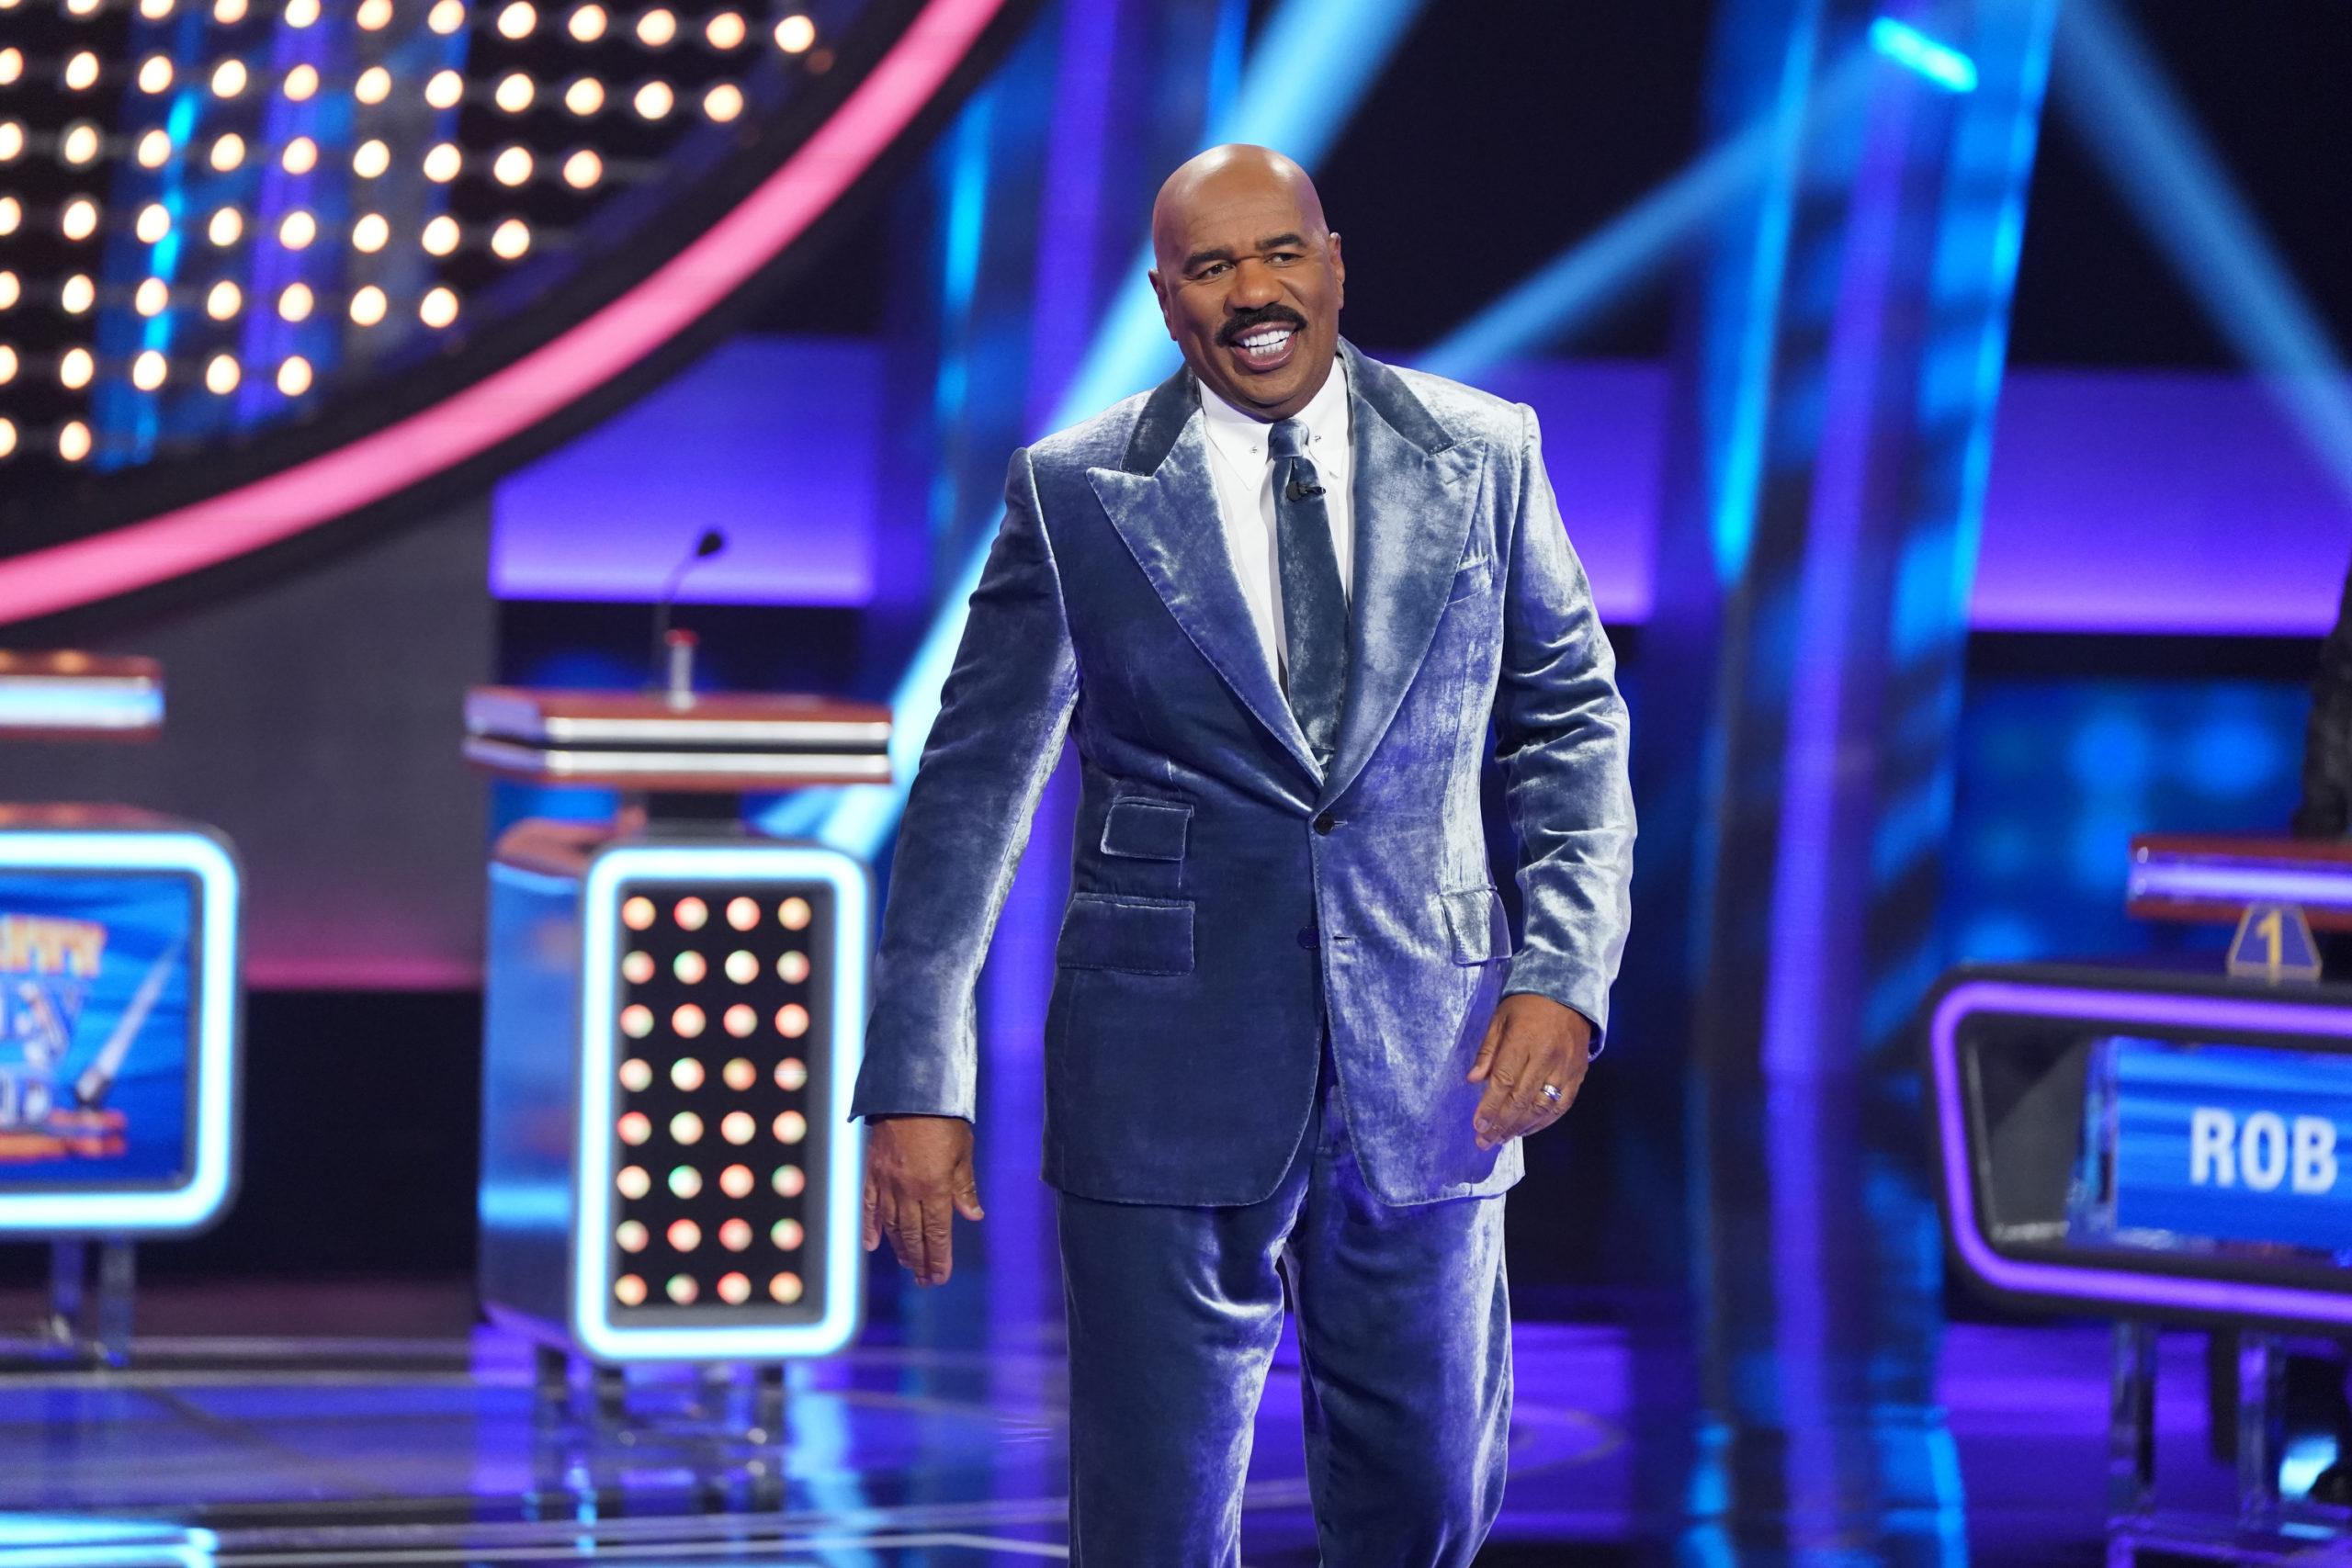 watch family feud full episodes free online